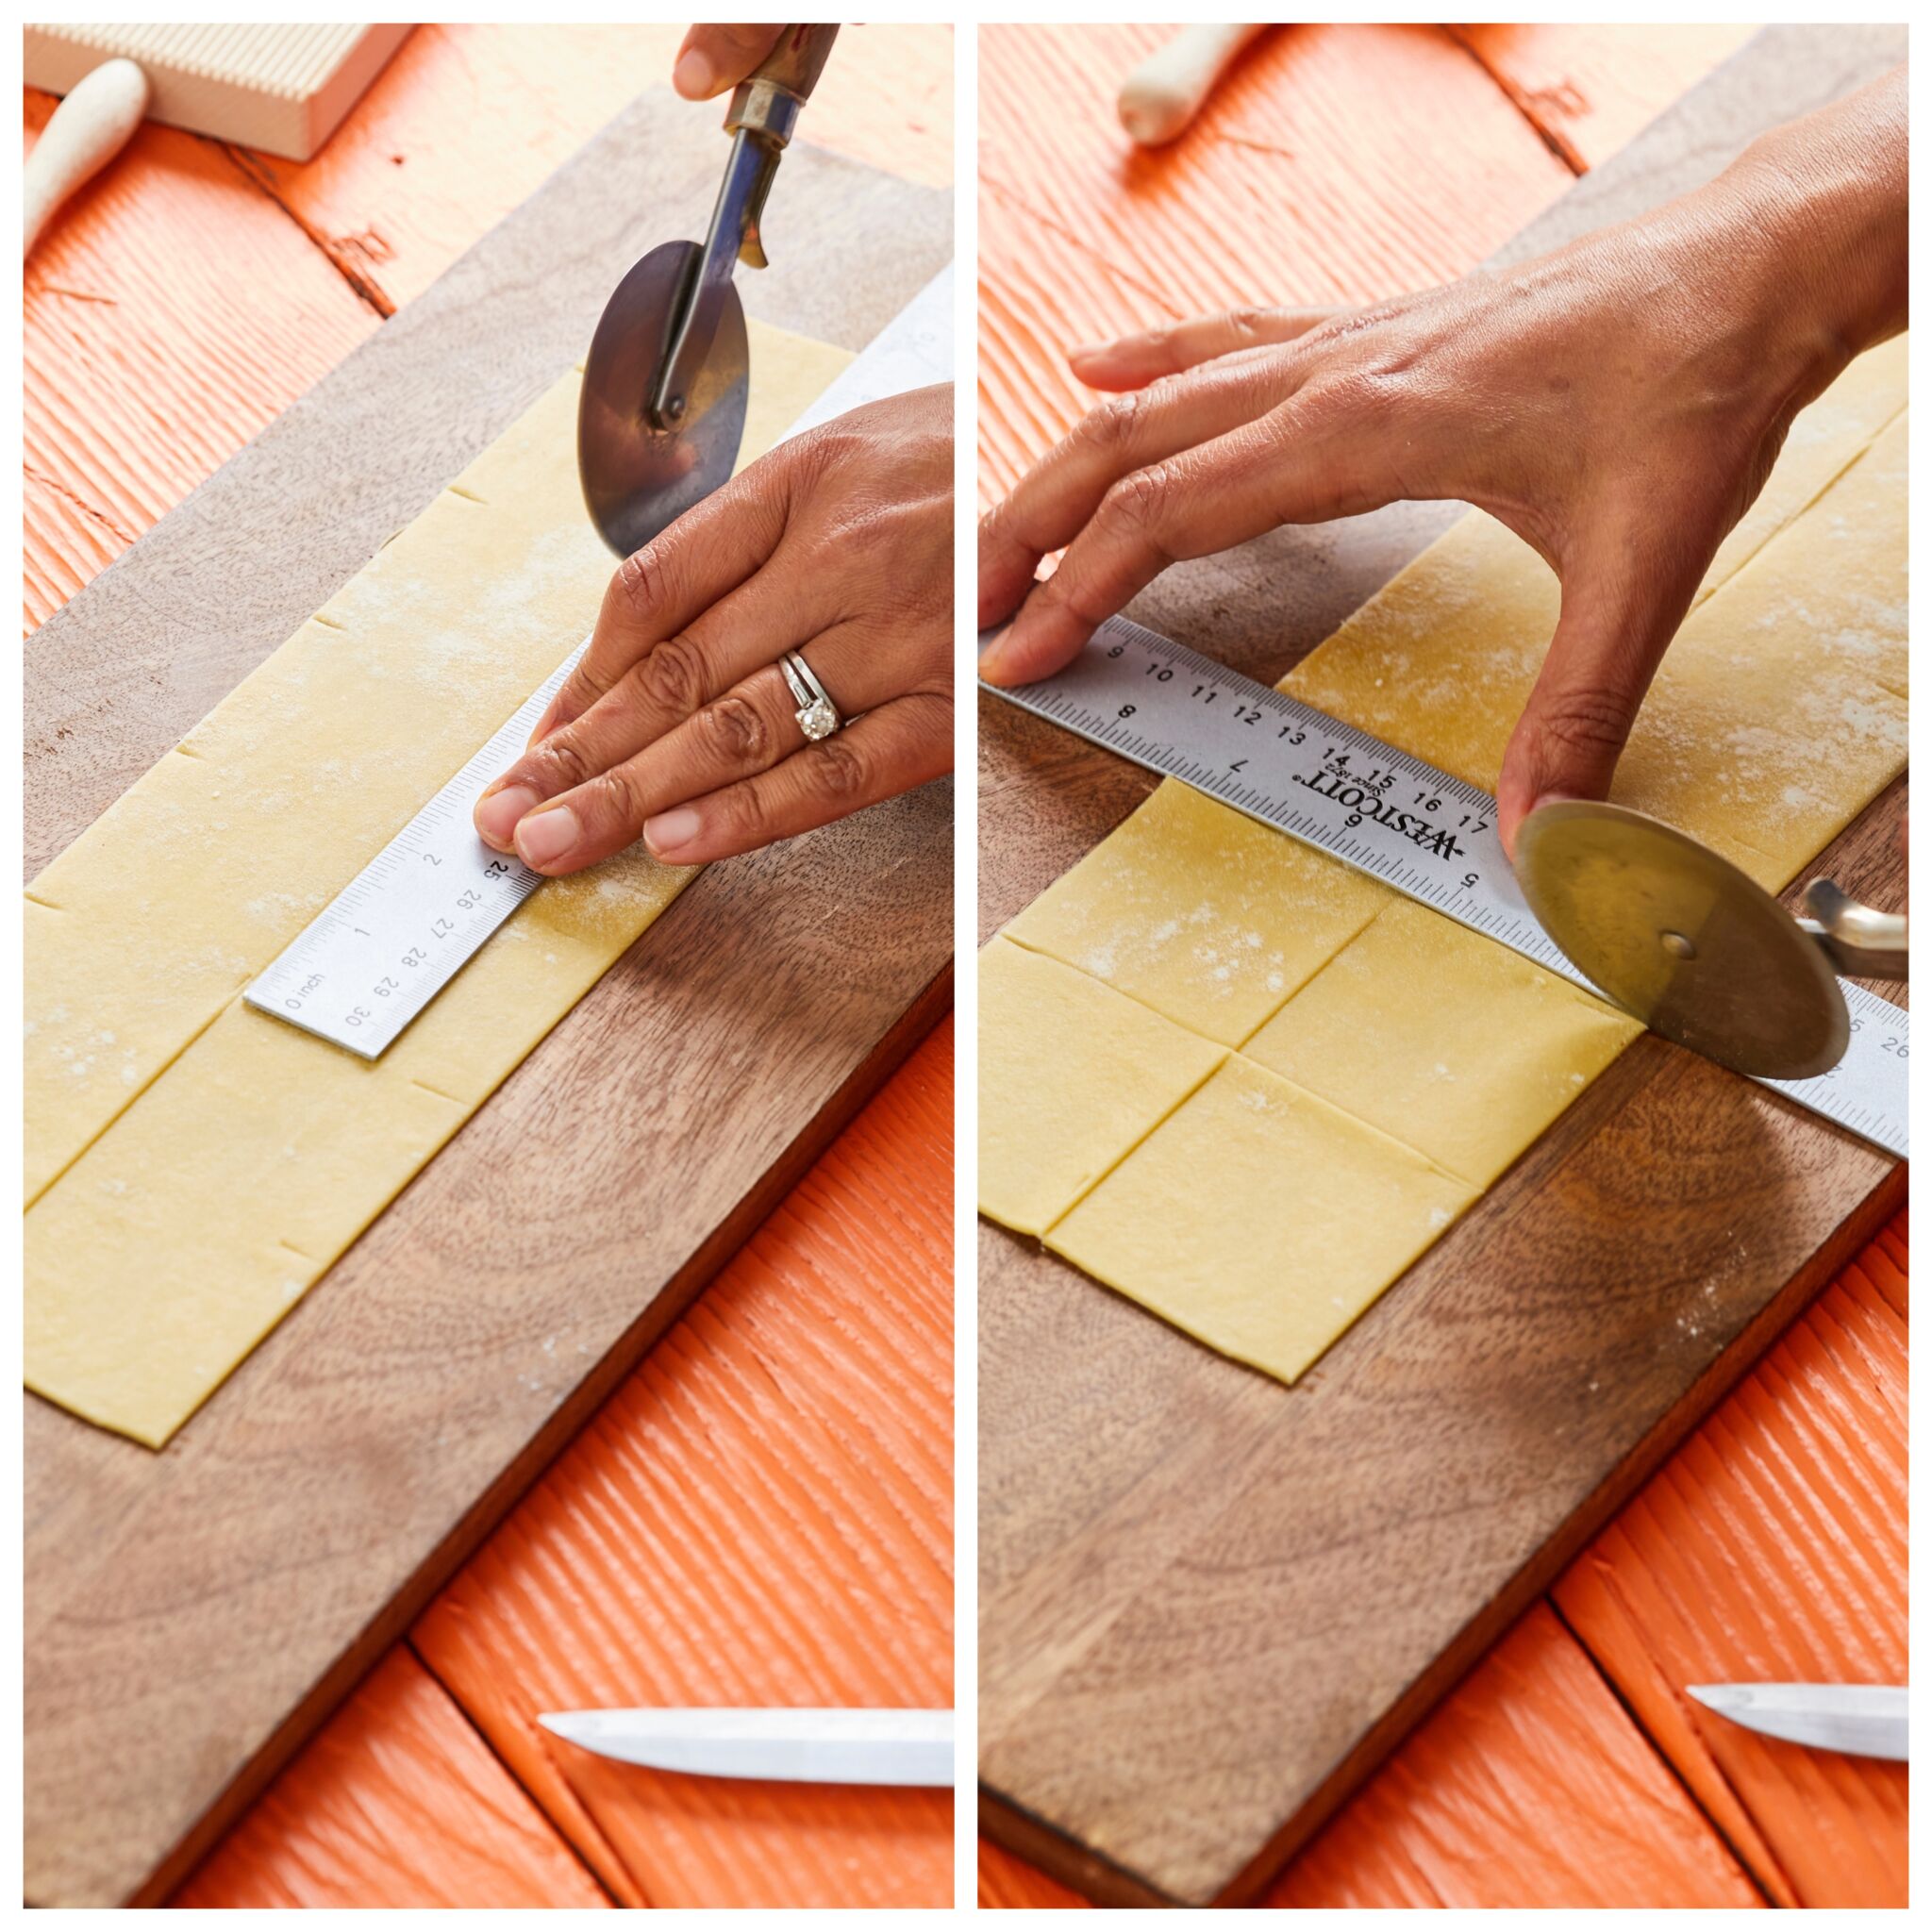 Step-by-step instruction: cut the rolled-out dough into 2-inch squares. Cover the remaining square with a dish towel.